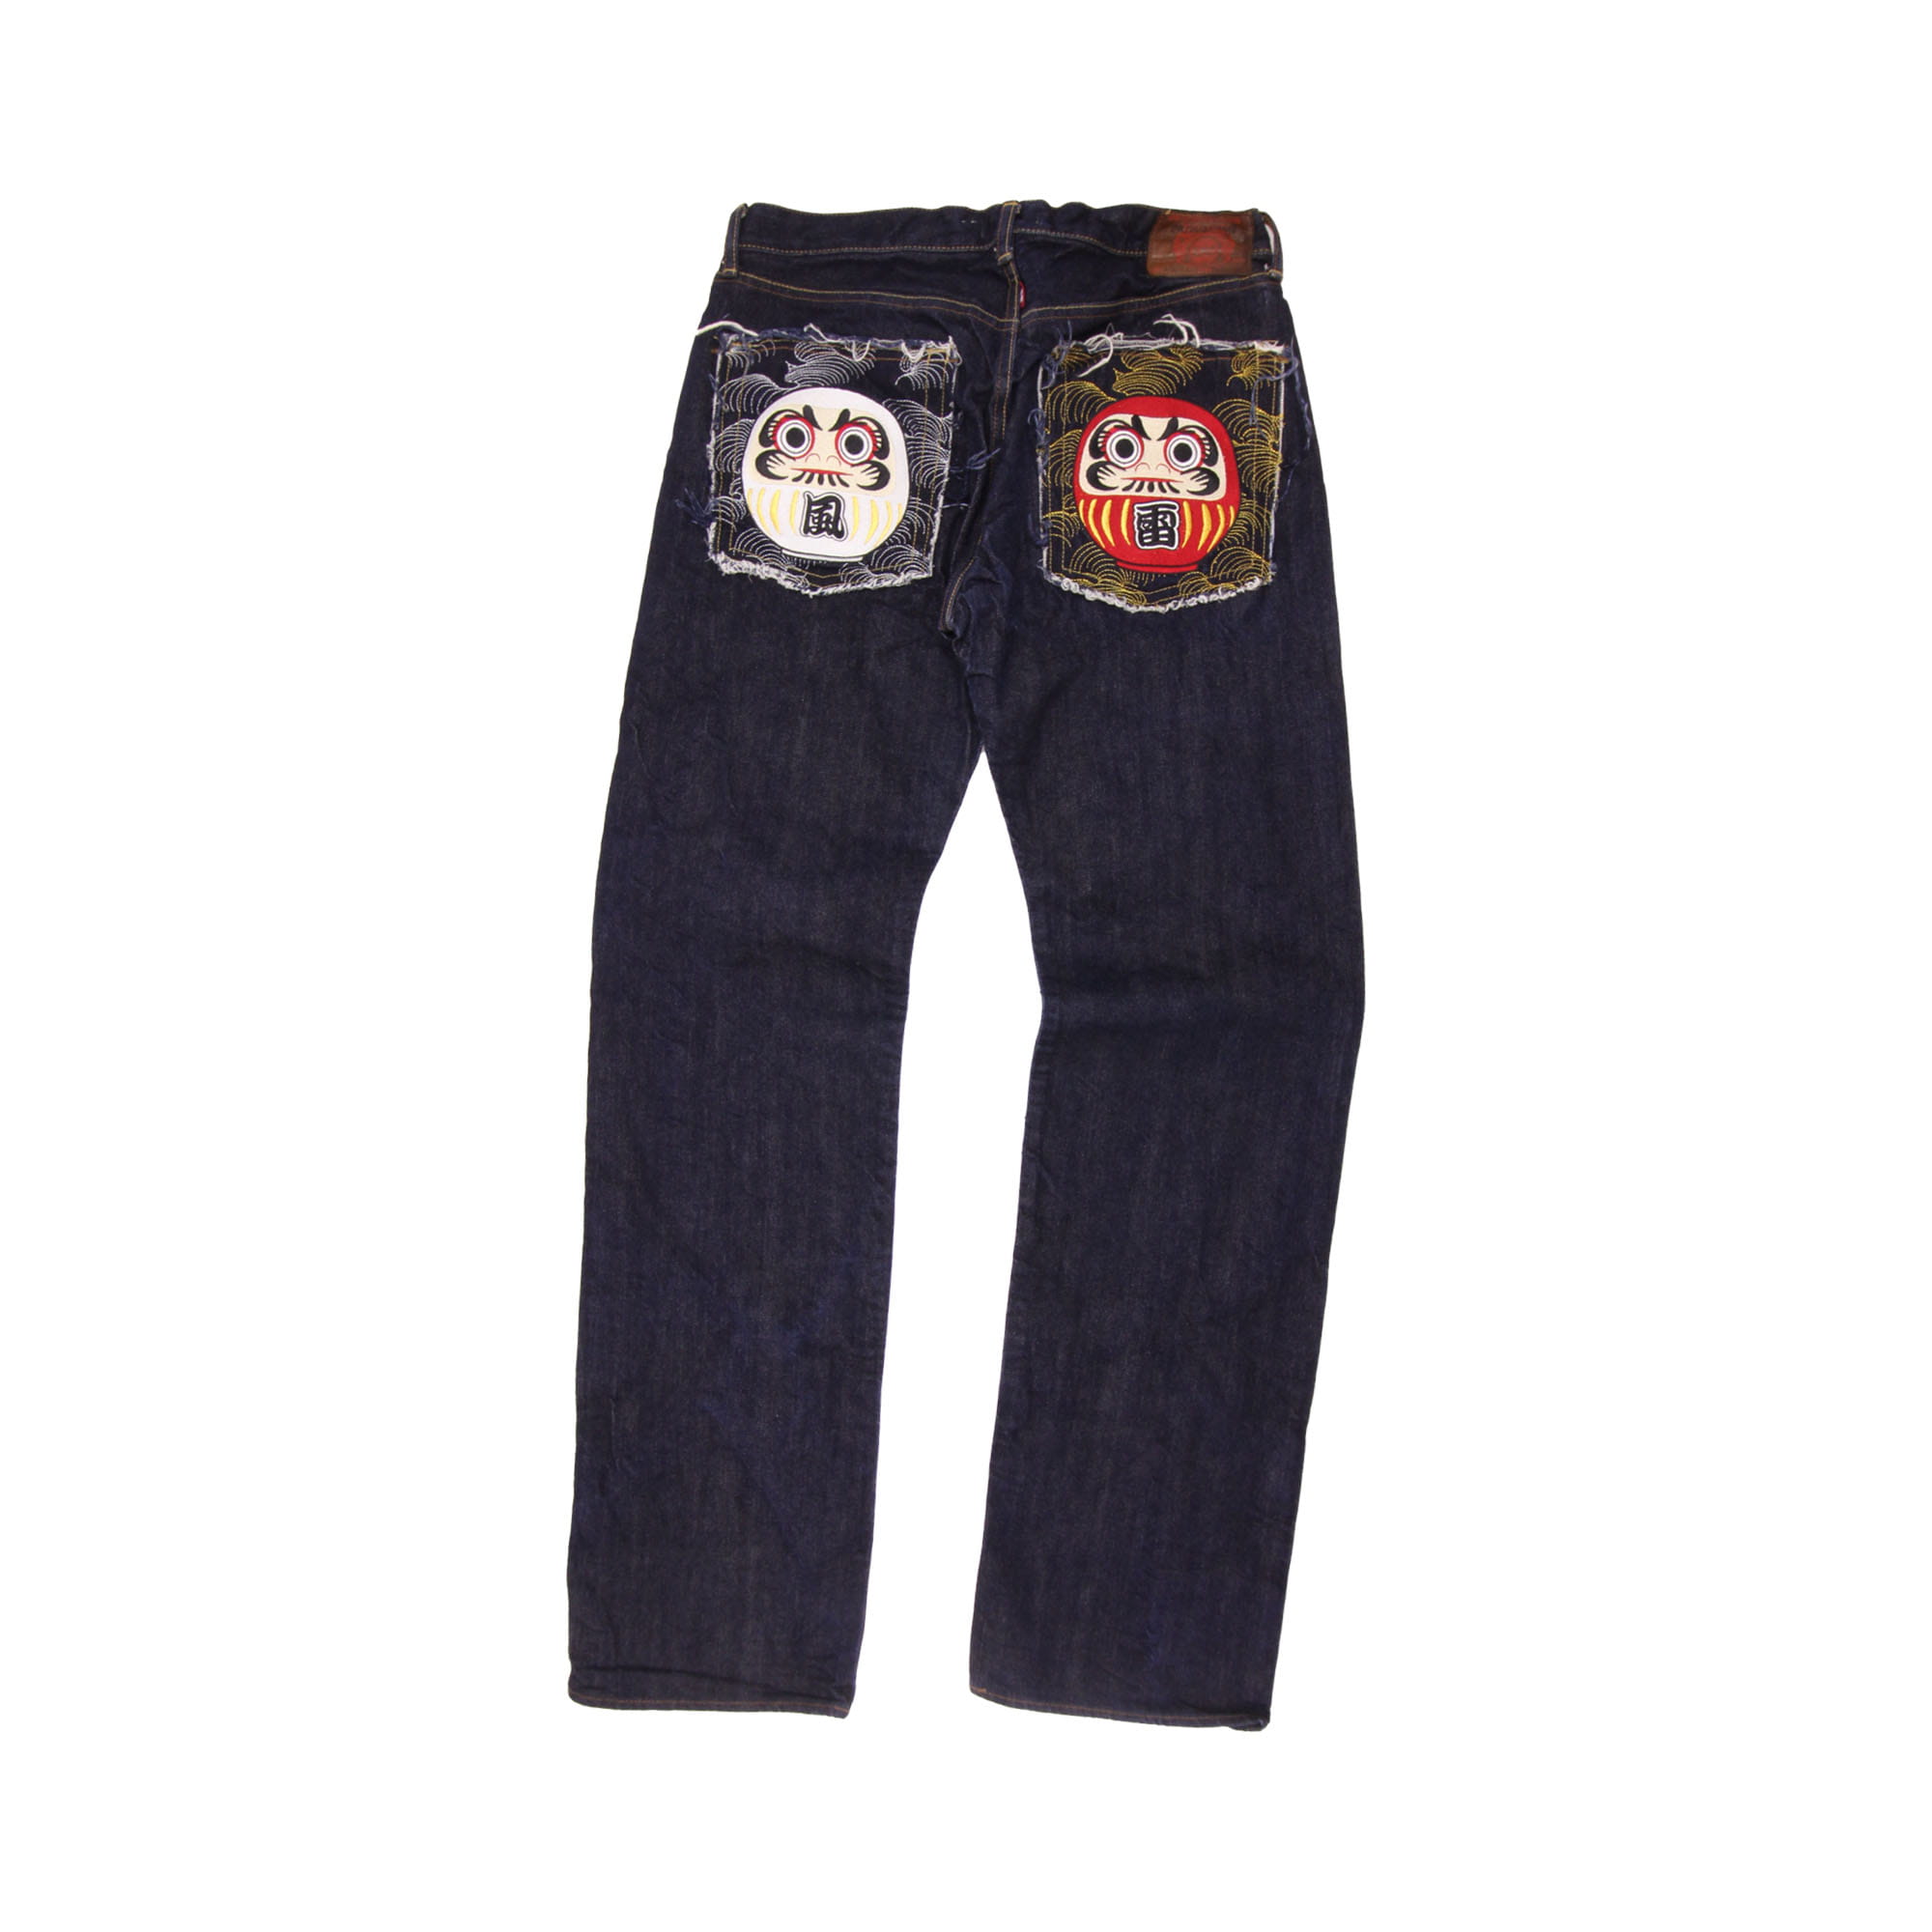 RMC Jeans 